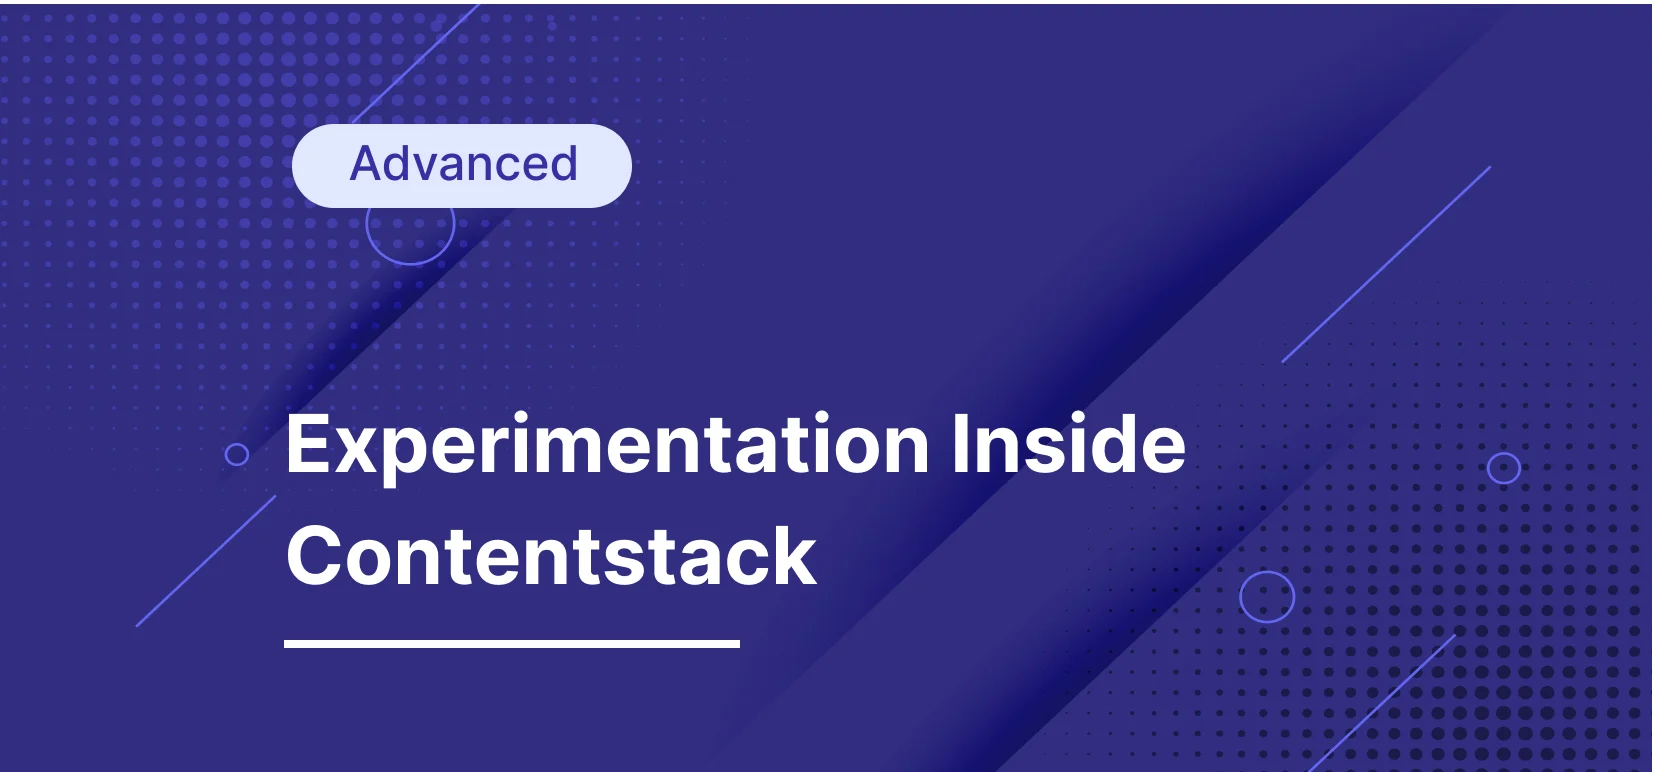 A Step-by-Step Experimentation Guide for Contentstack